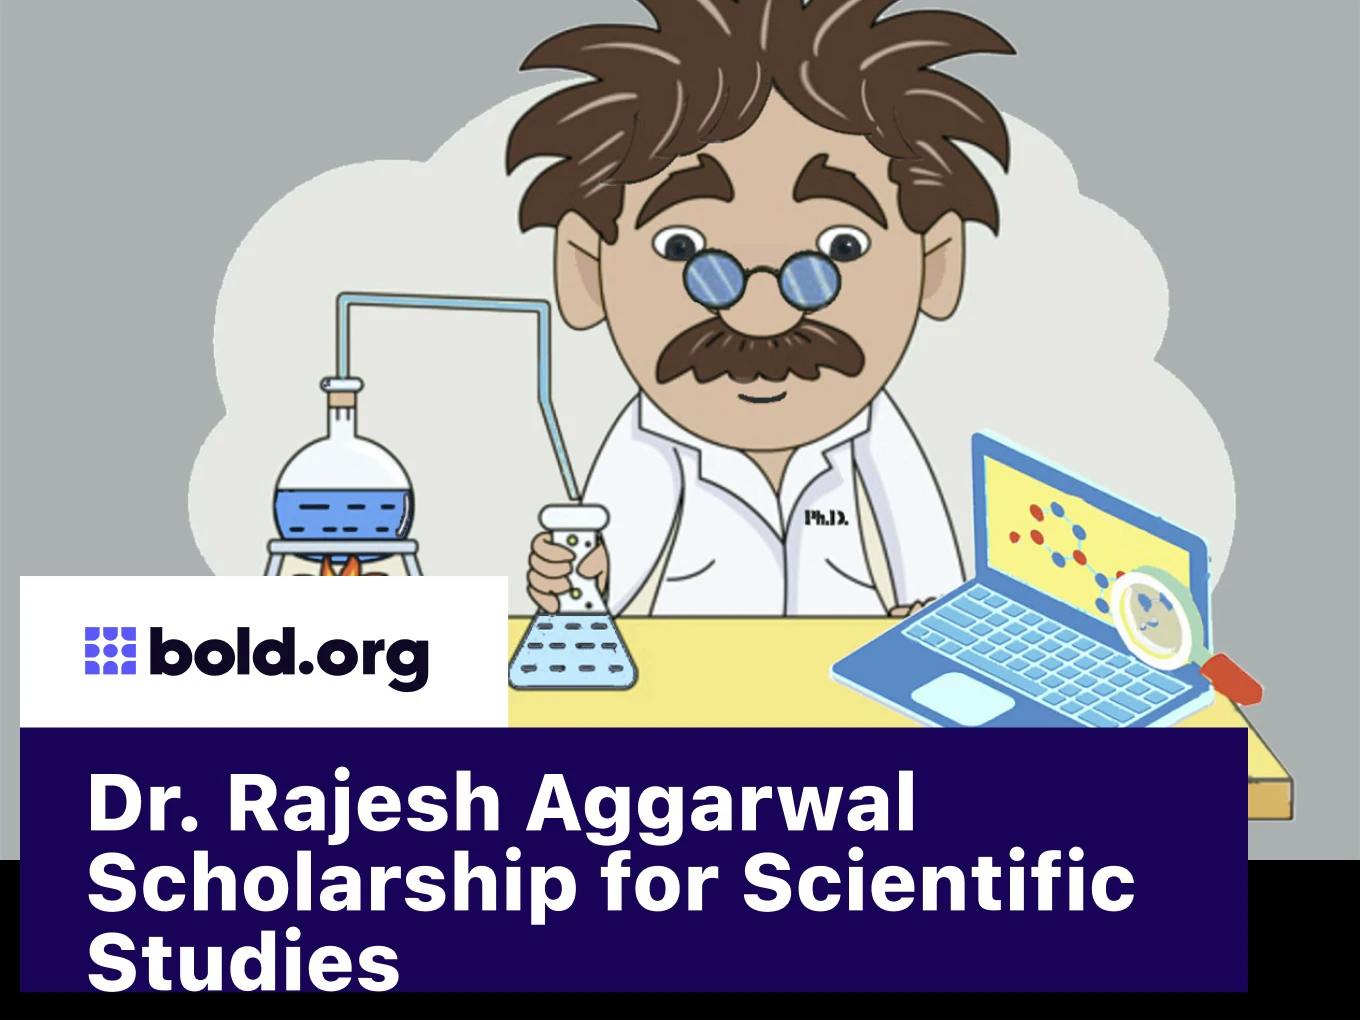 Dr. Rajesh Aggarwal Scholarship for Scientific Studies